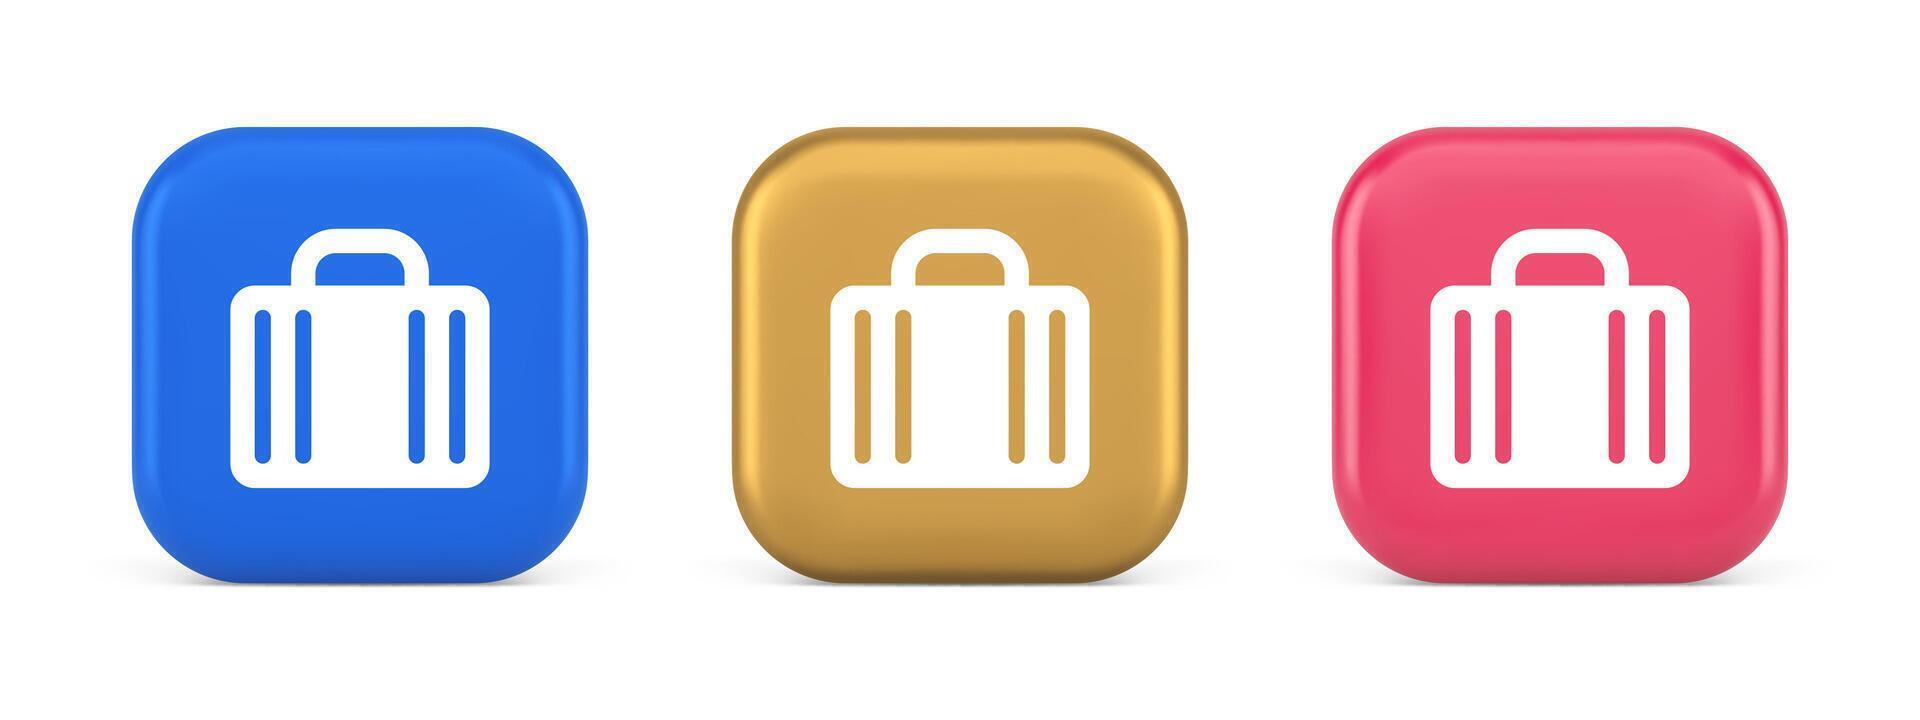 Suitcase baggage briefcase button office business accessory travel tourism element 3d icon vector